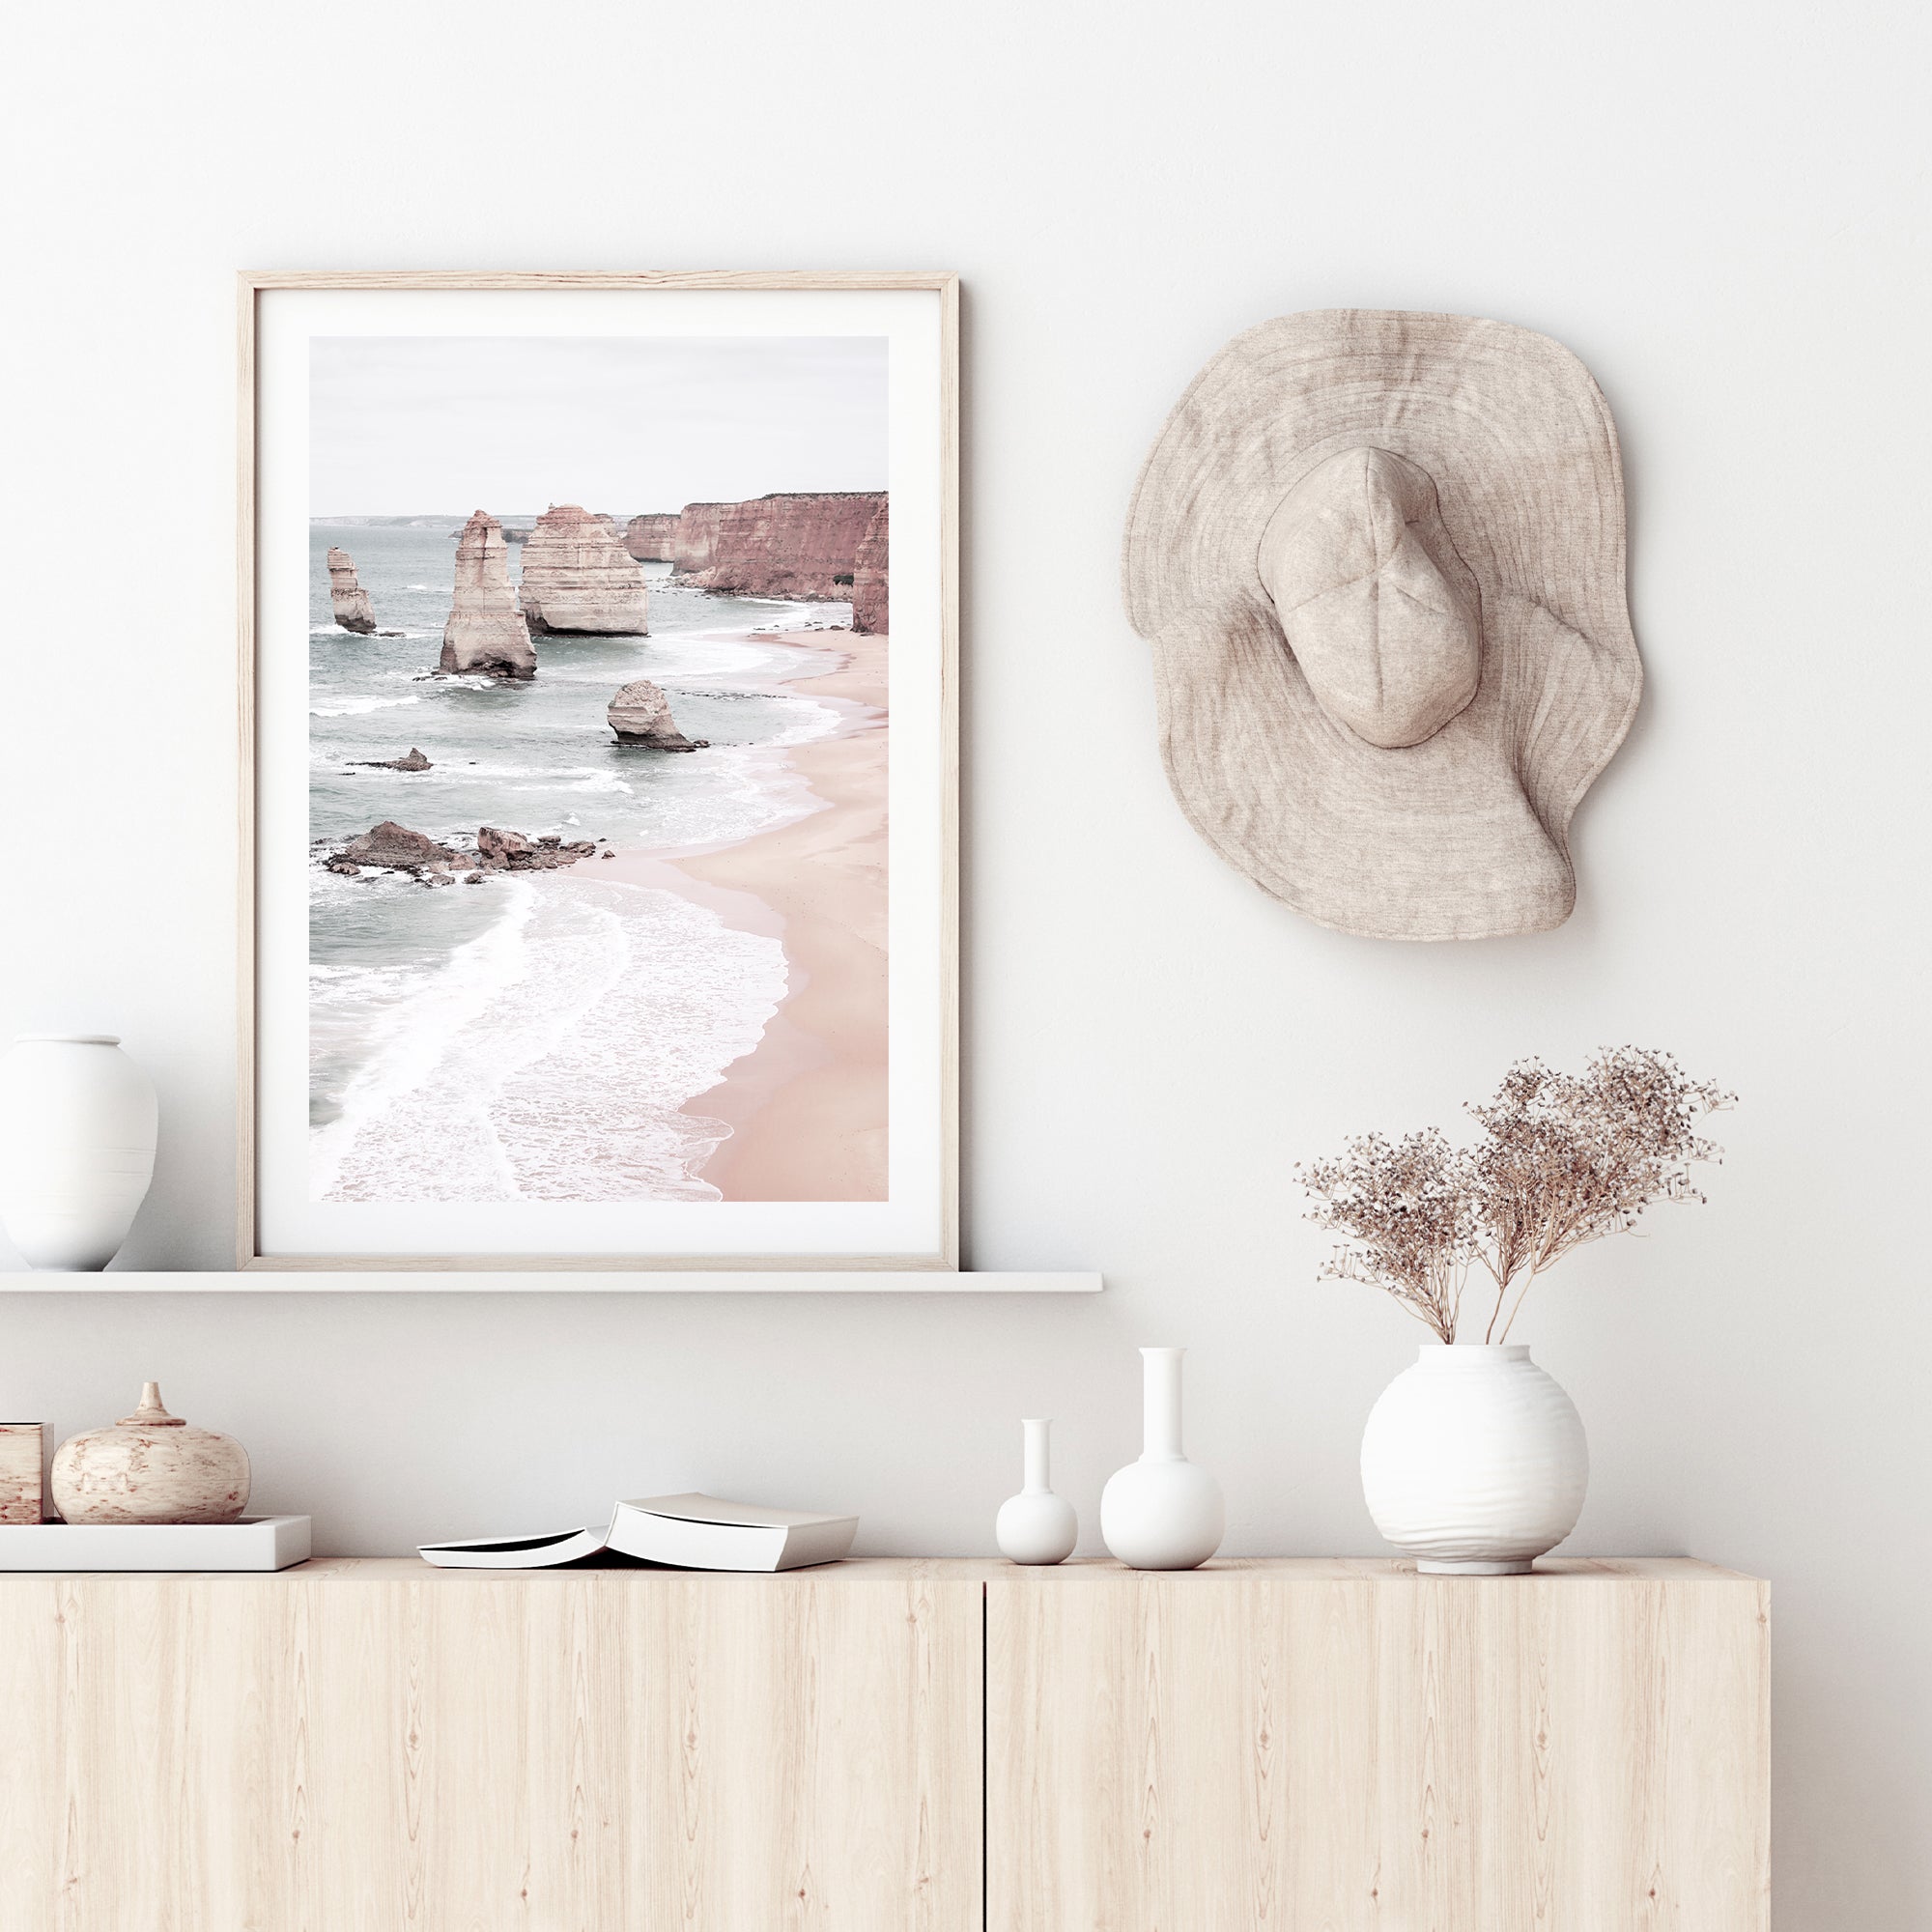 An artwork of the Twelve Apostles B taken from the Great Ocean Road available in canvas and print.